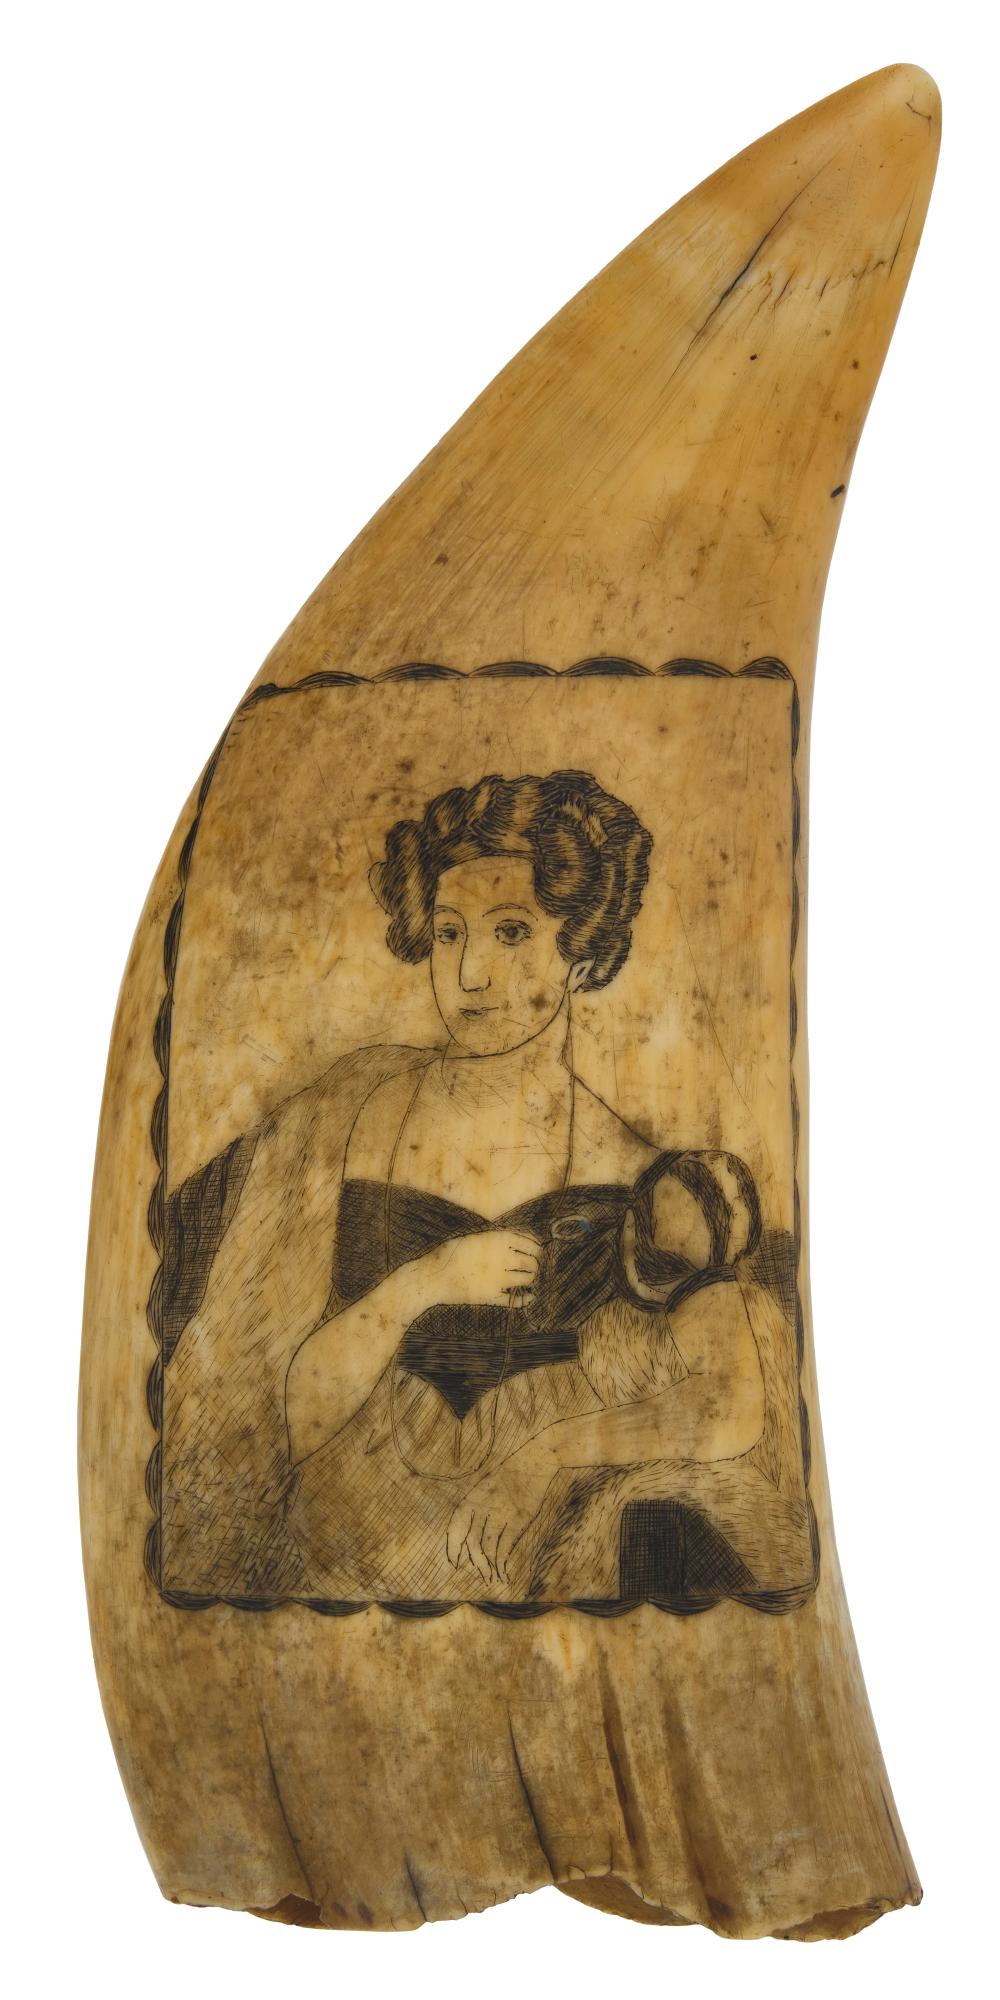 SCRIMSHAW WHALE S TOOTH IN THE 2f28b5